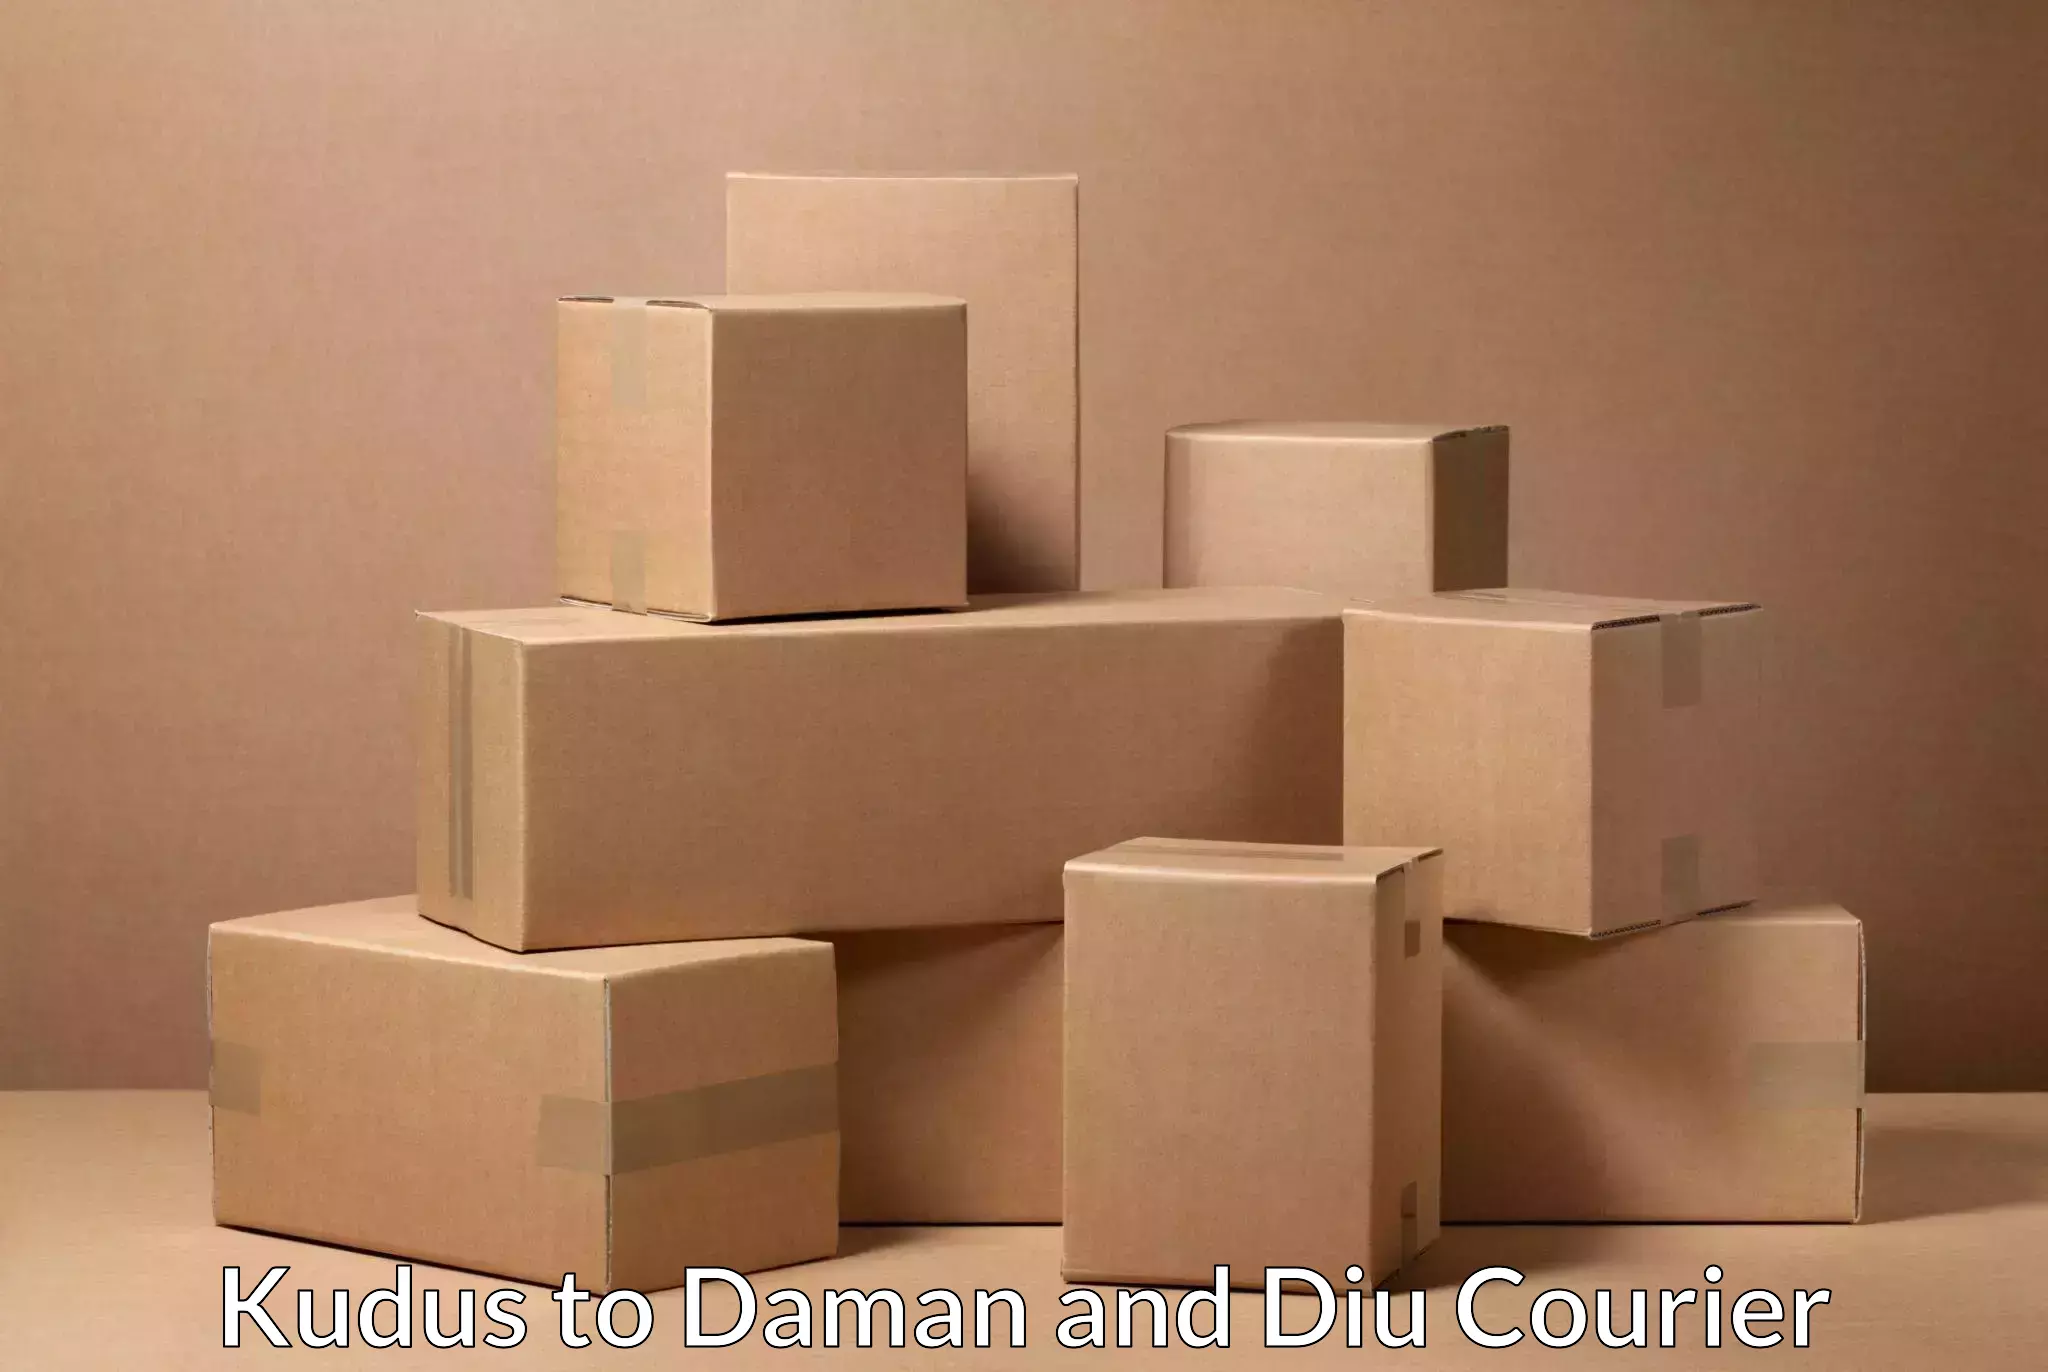 Residential courier service Kudus to Daman